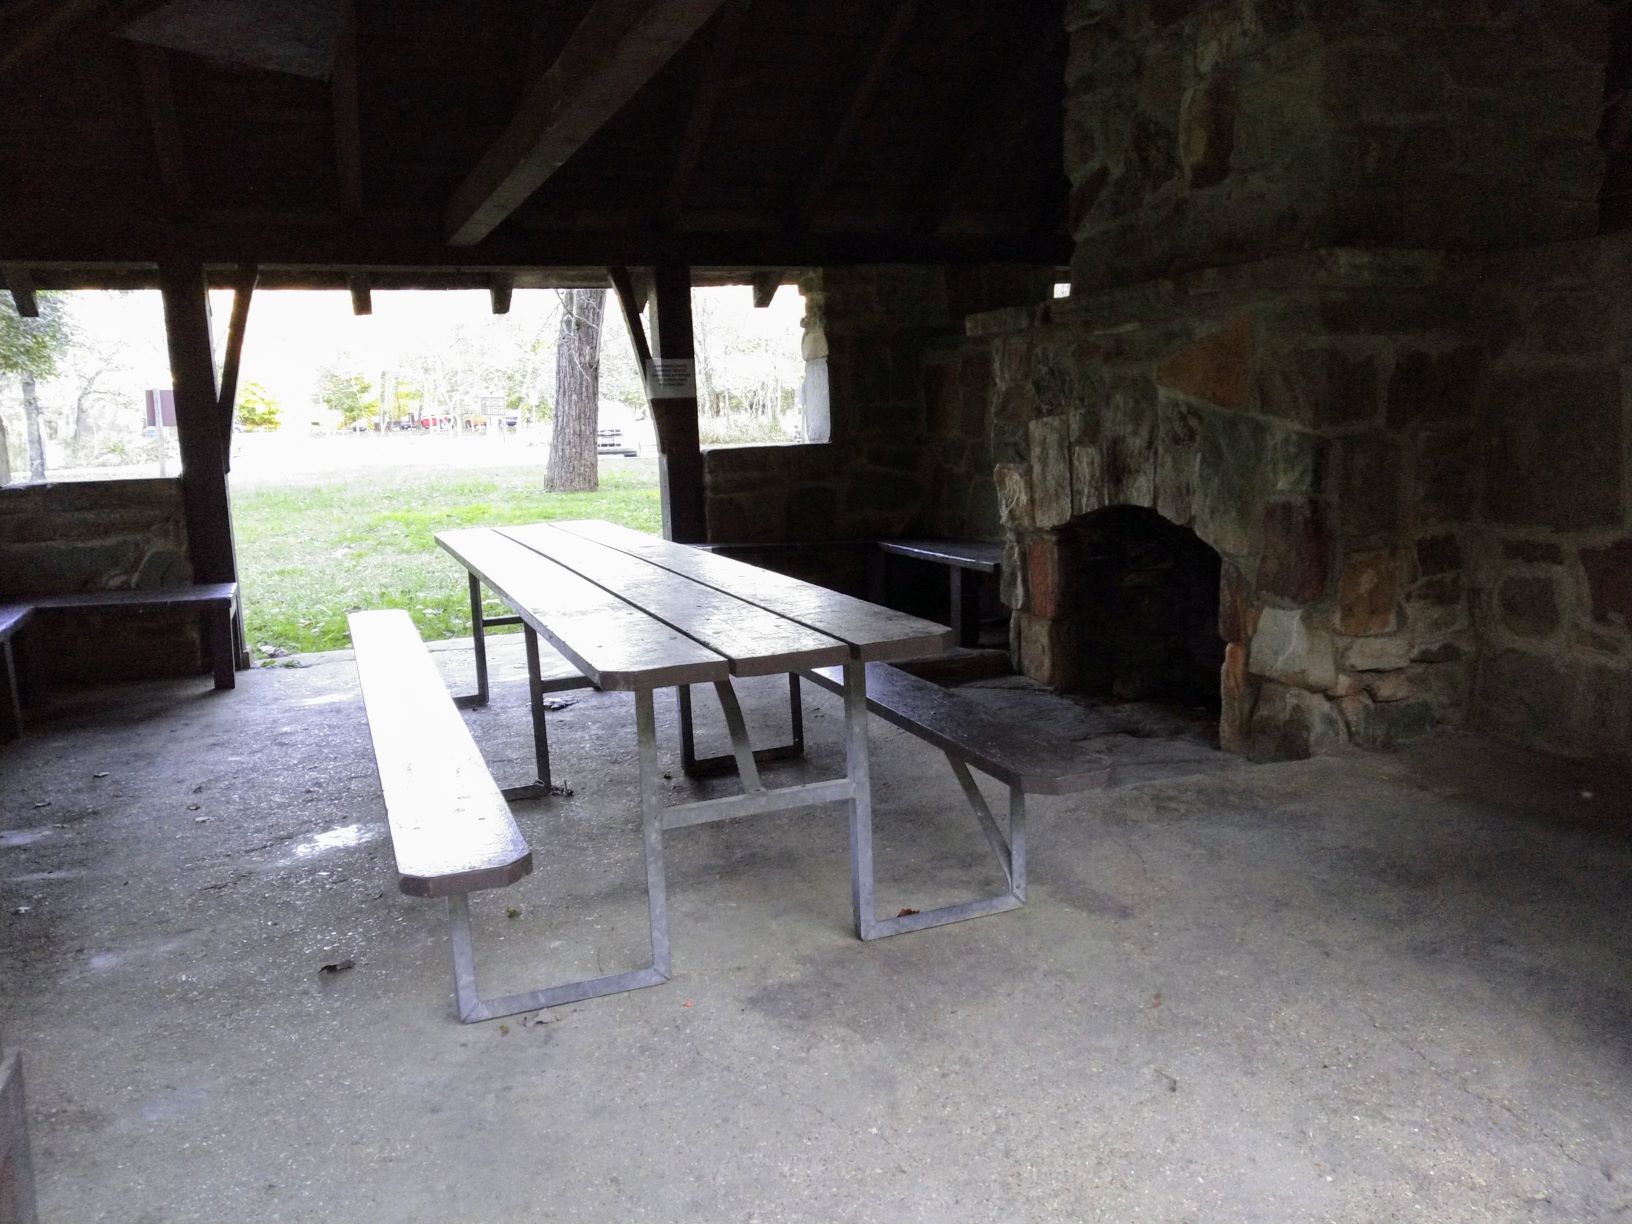 Picnic table and stone fireplace inside the CCC shelter